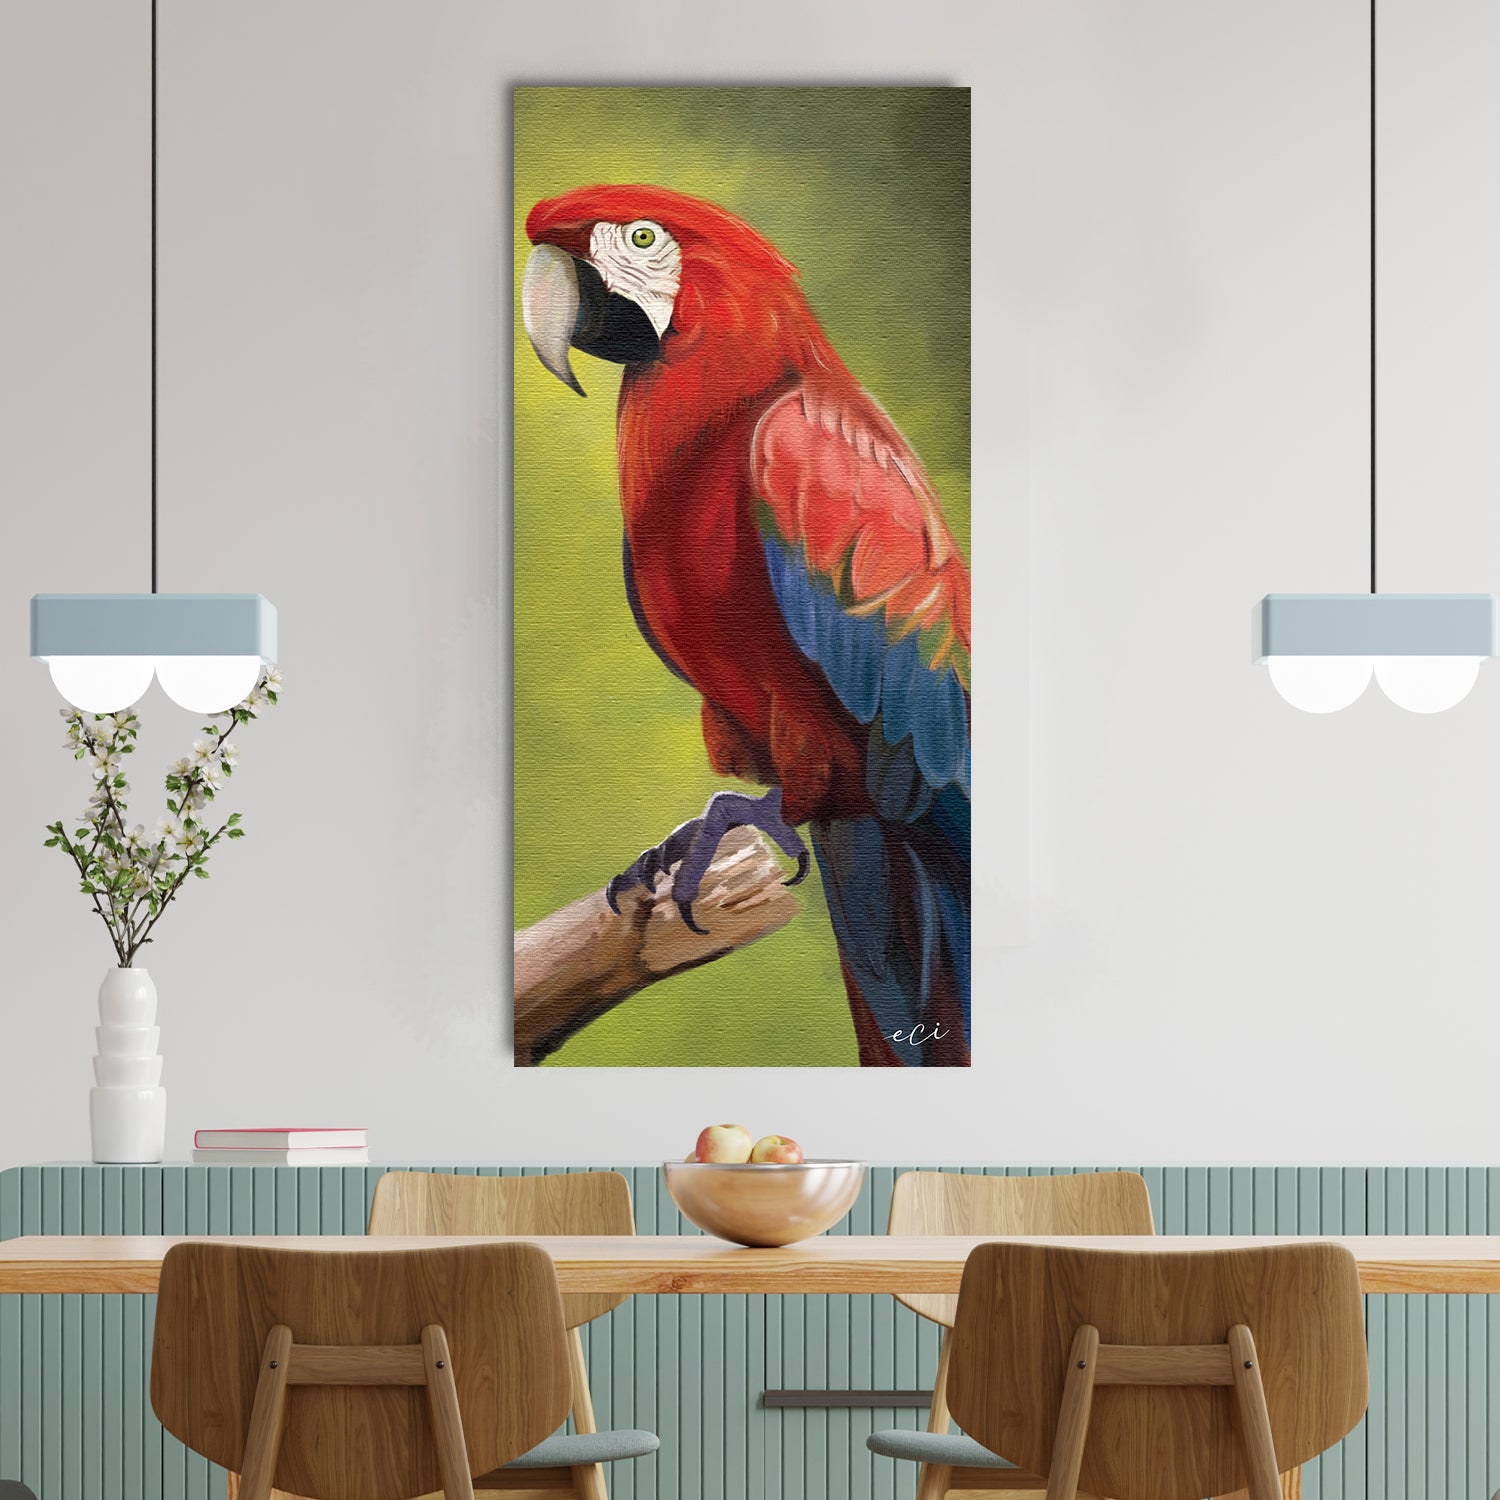 Parrot On Tree Branch Canvas Painting Digital Printed Bird Wall Art 1